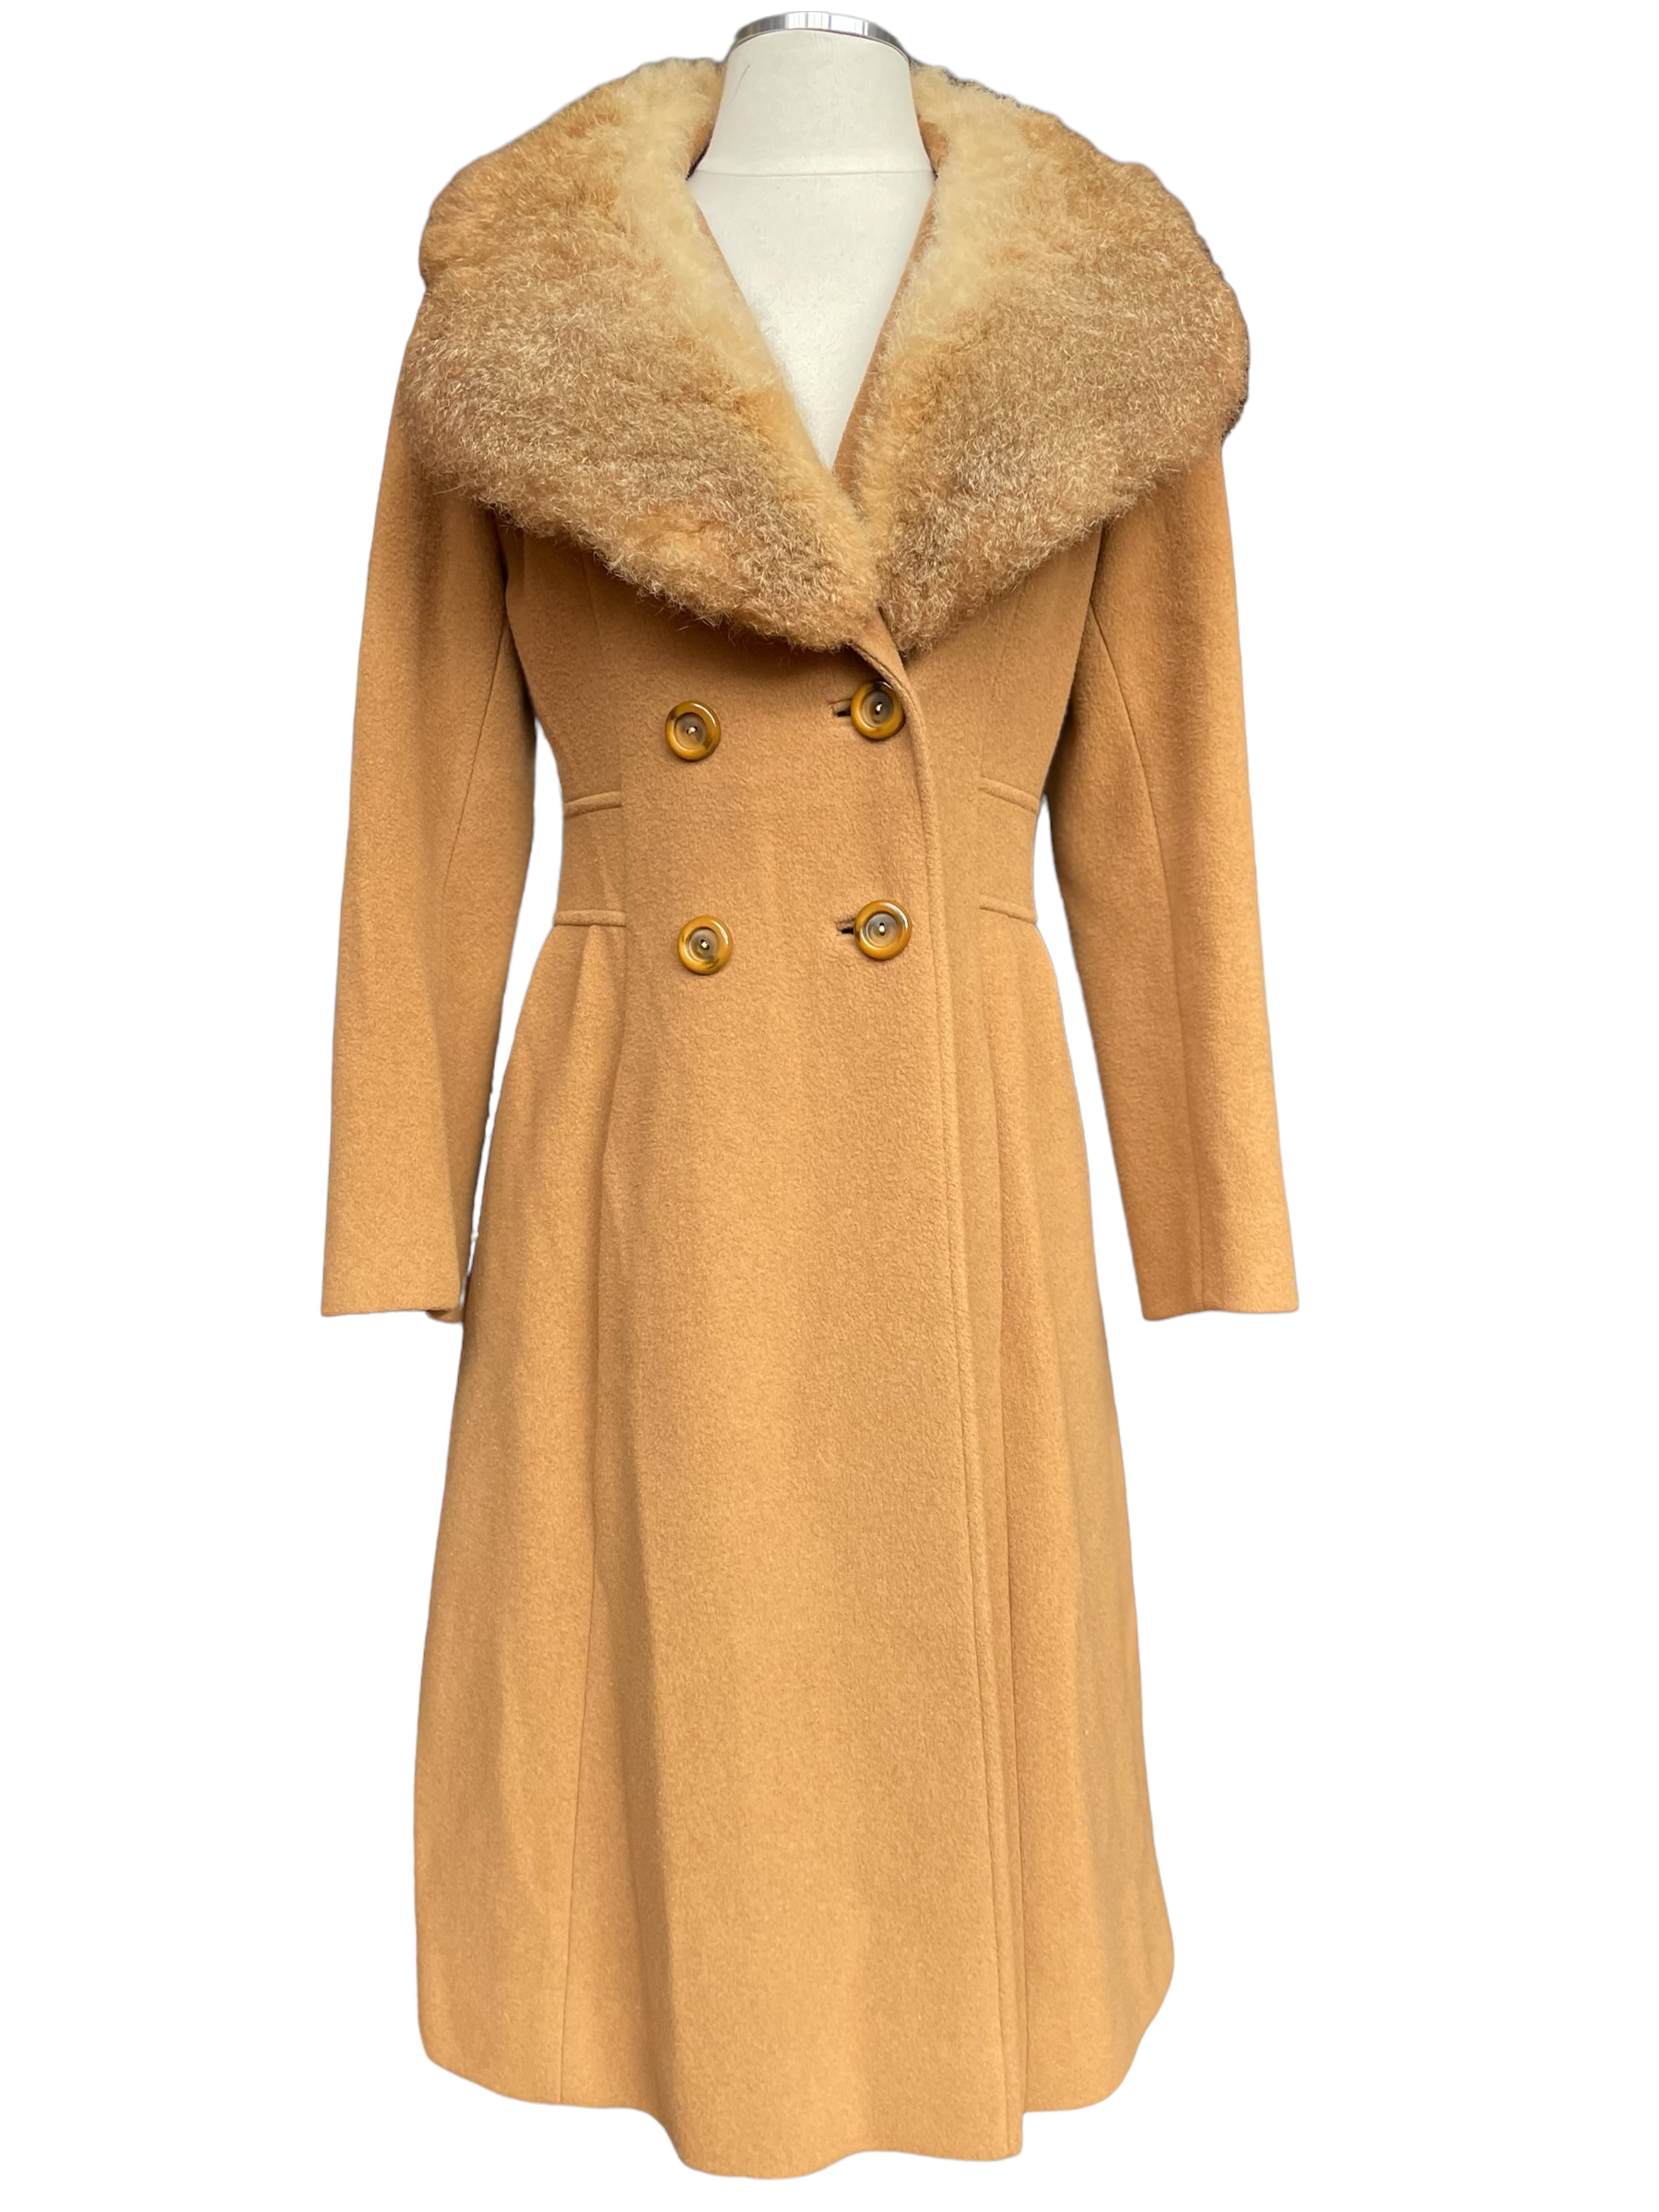 Full front view ofVintage 1960s Fashionbilt Wool Coat with Fur Collar Barn Owl seattle true vintage